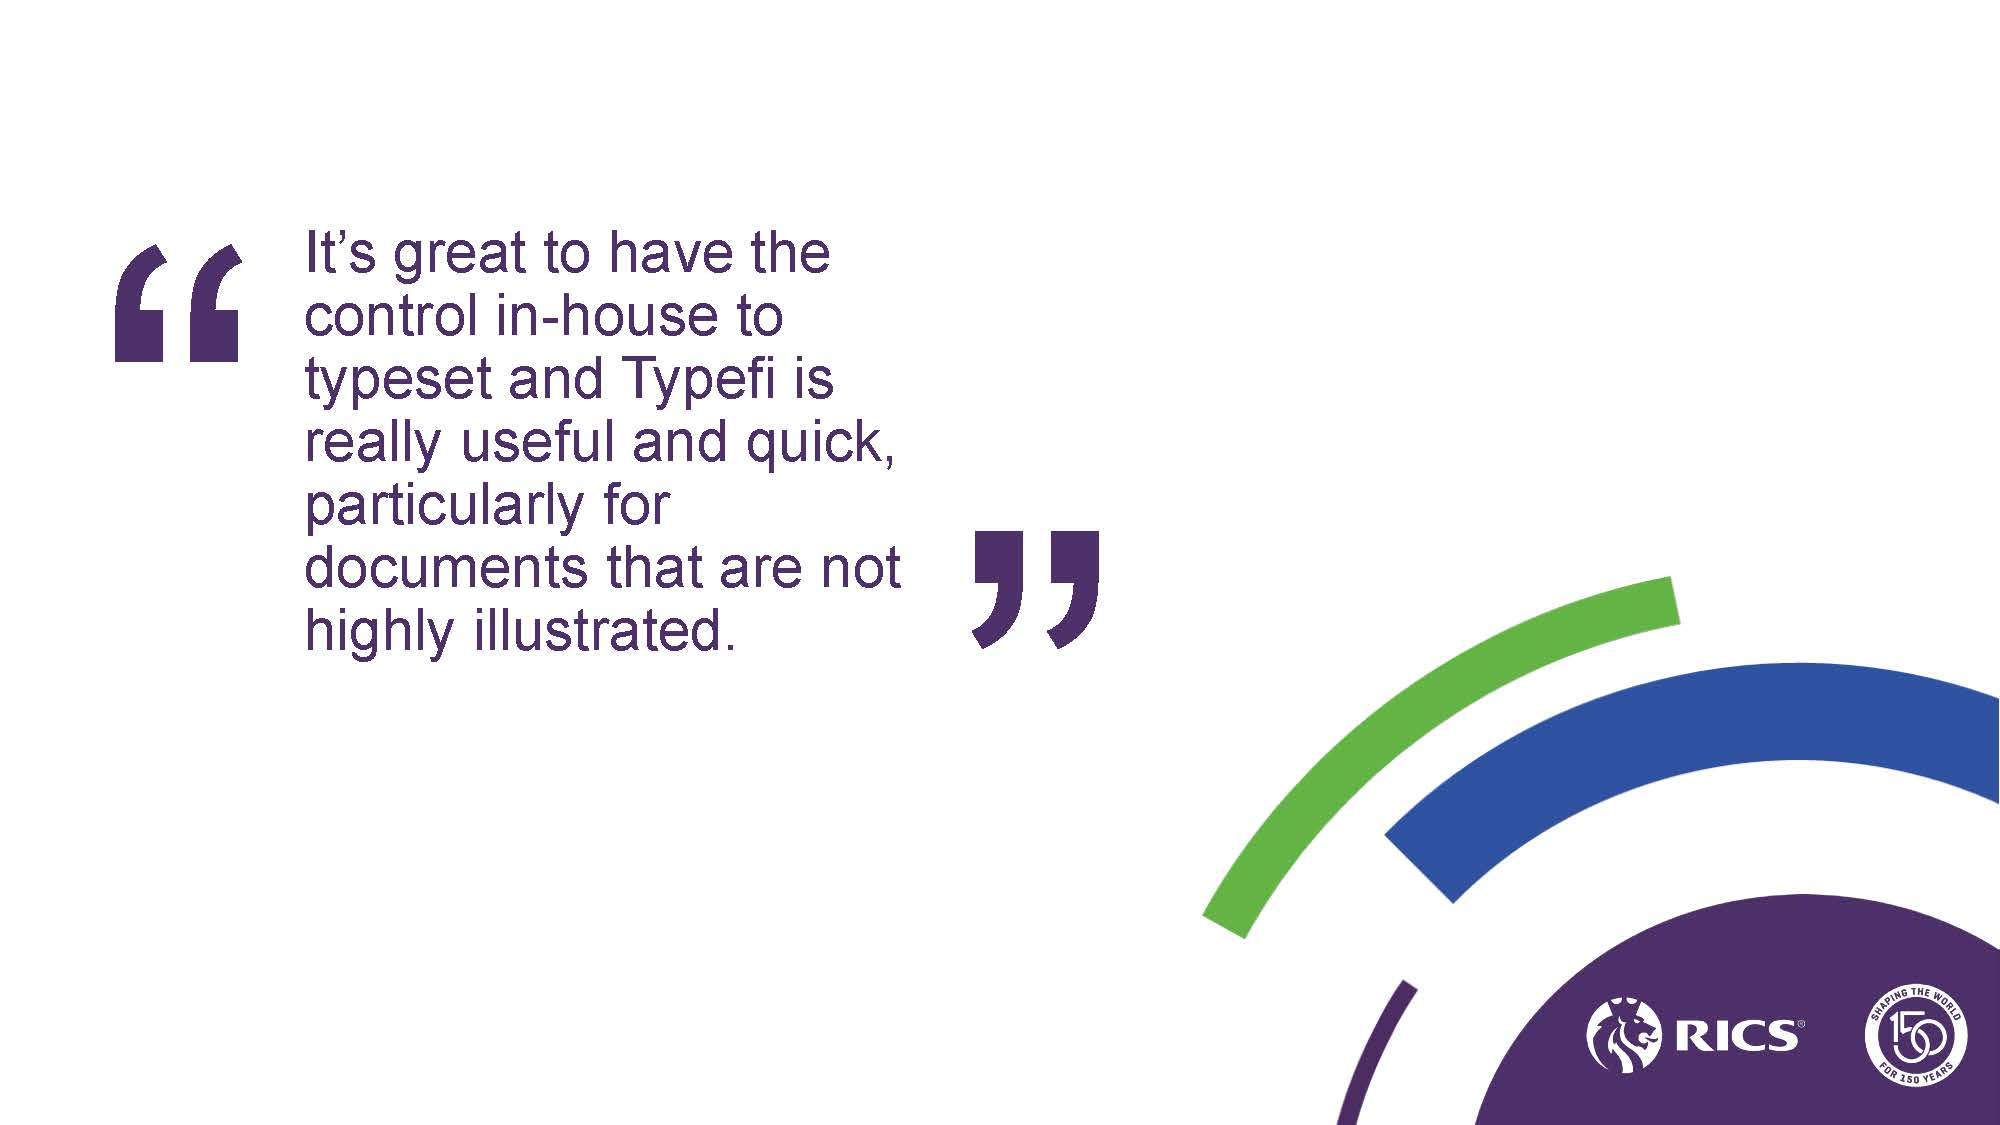 Slide with a quote from a RICS team member: “It’s great to have the control in-house to typeset and Typefi is really useful and quick, particularly for documents that are not highly illustrated.”